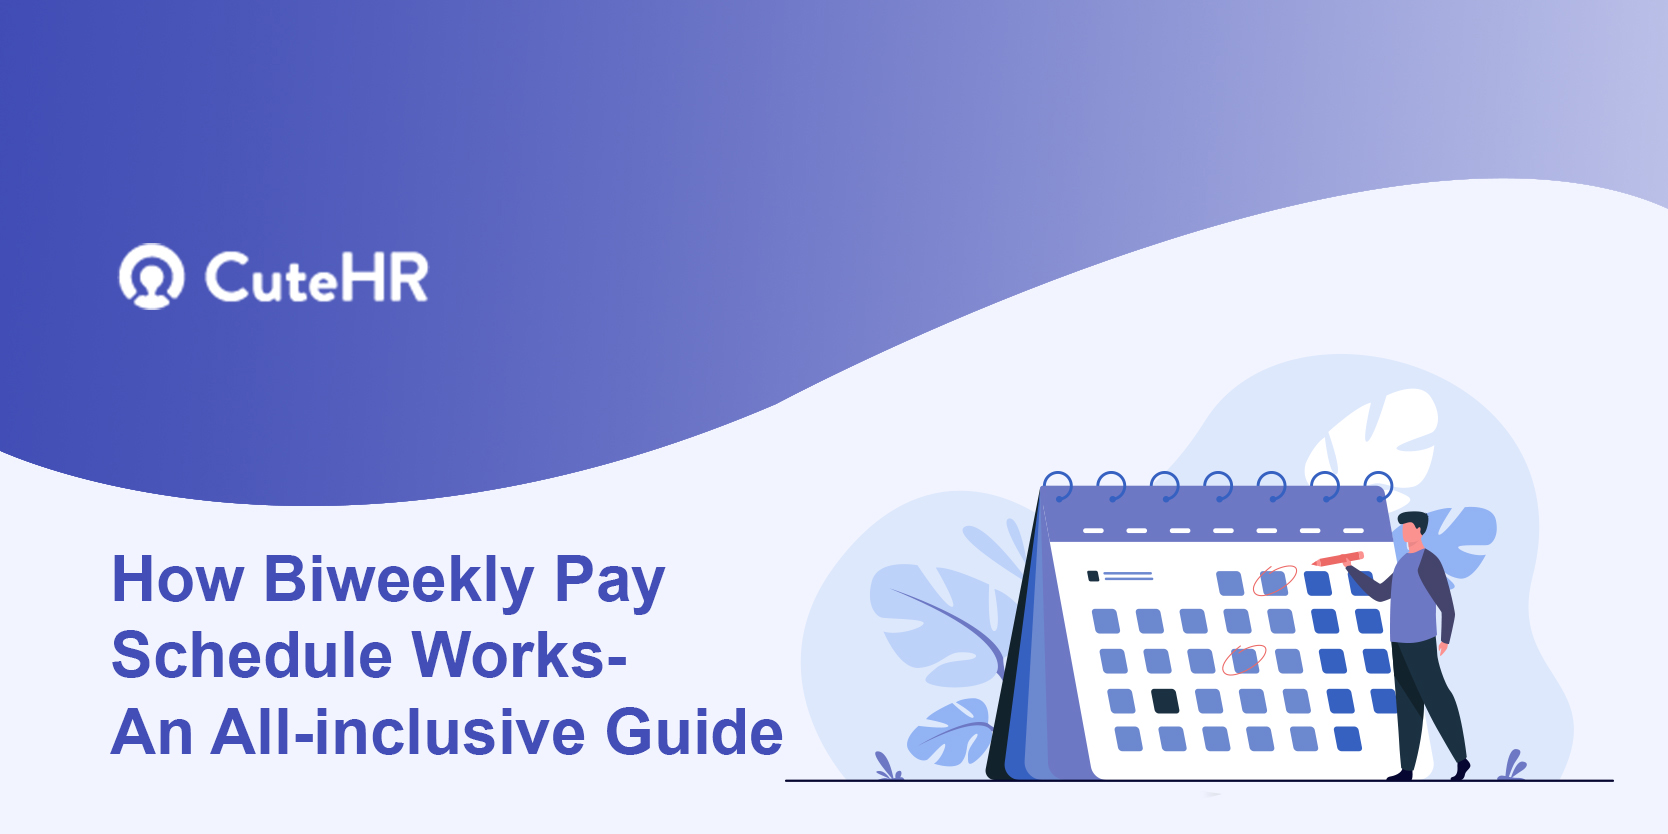 How Biweekly Pay Schedule Works? An All-inclusive Guide